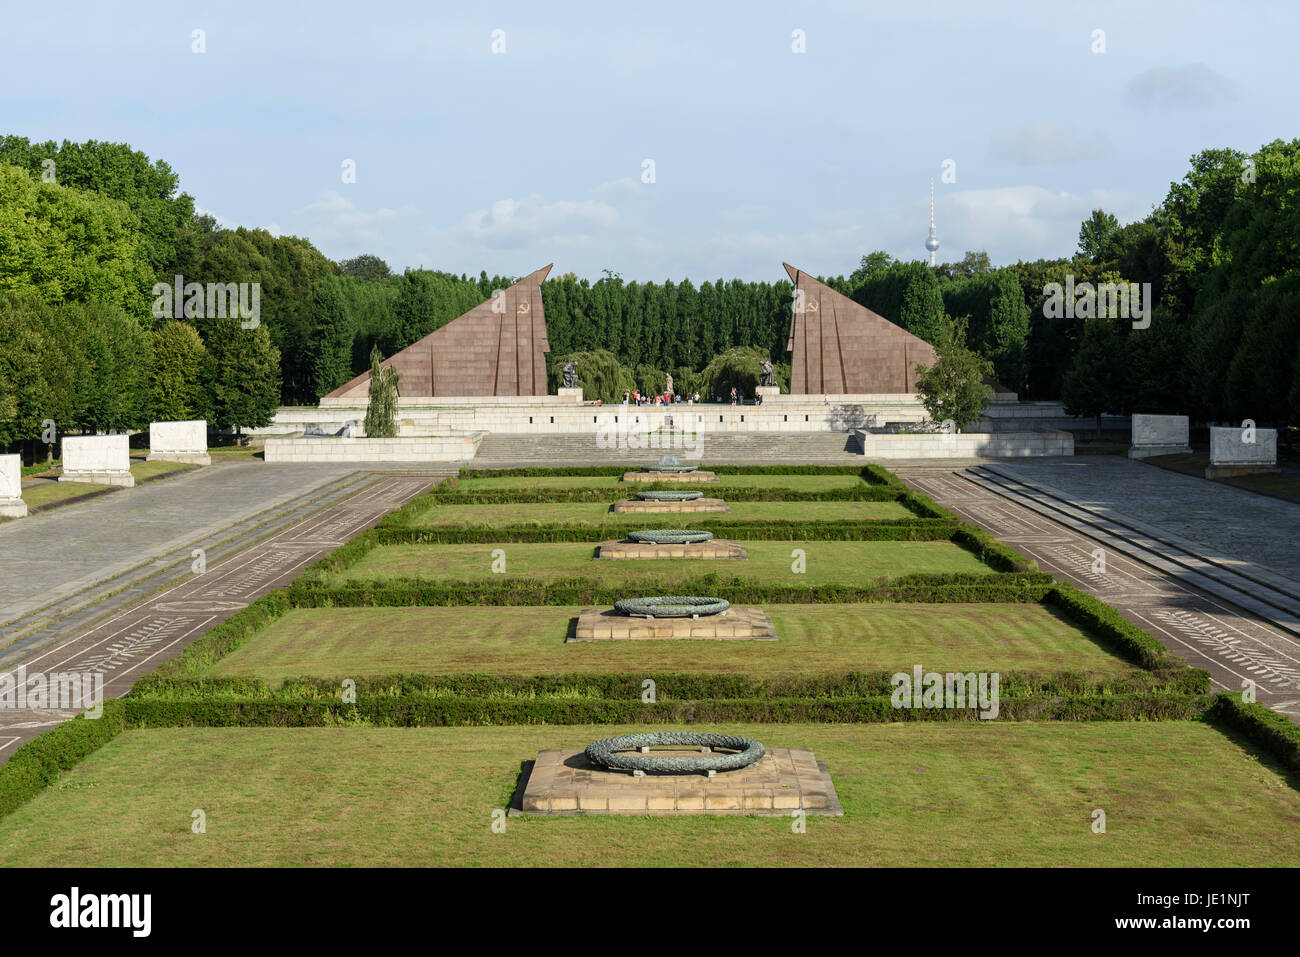 Berlin. Germany. Soviet War Memorial in Treptower Park, commemorates Soviet soldiers who fell in the Battle of Berlin, Apr-May 1945. Stock Photo